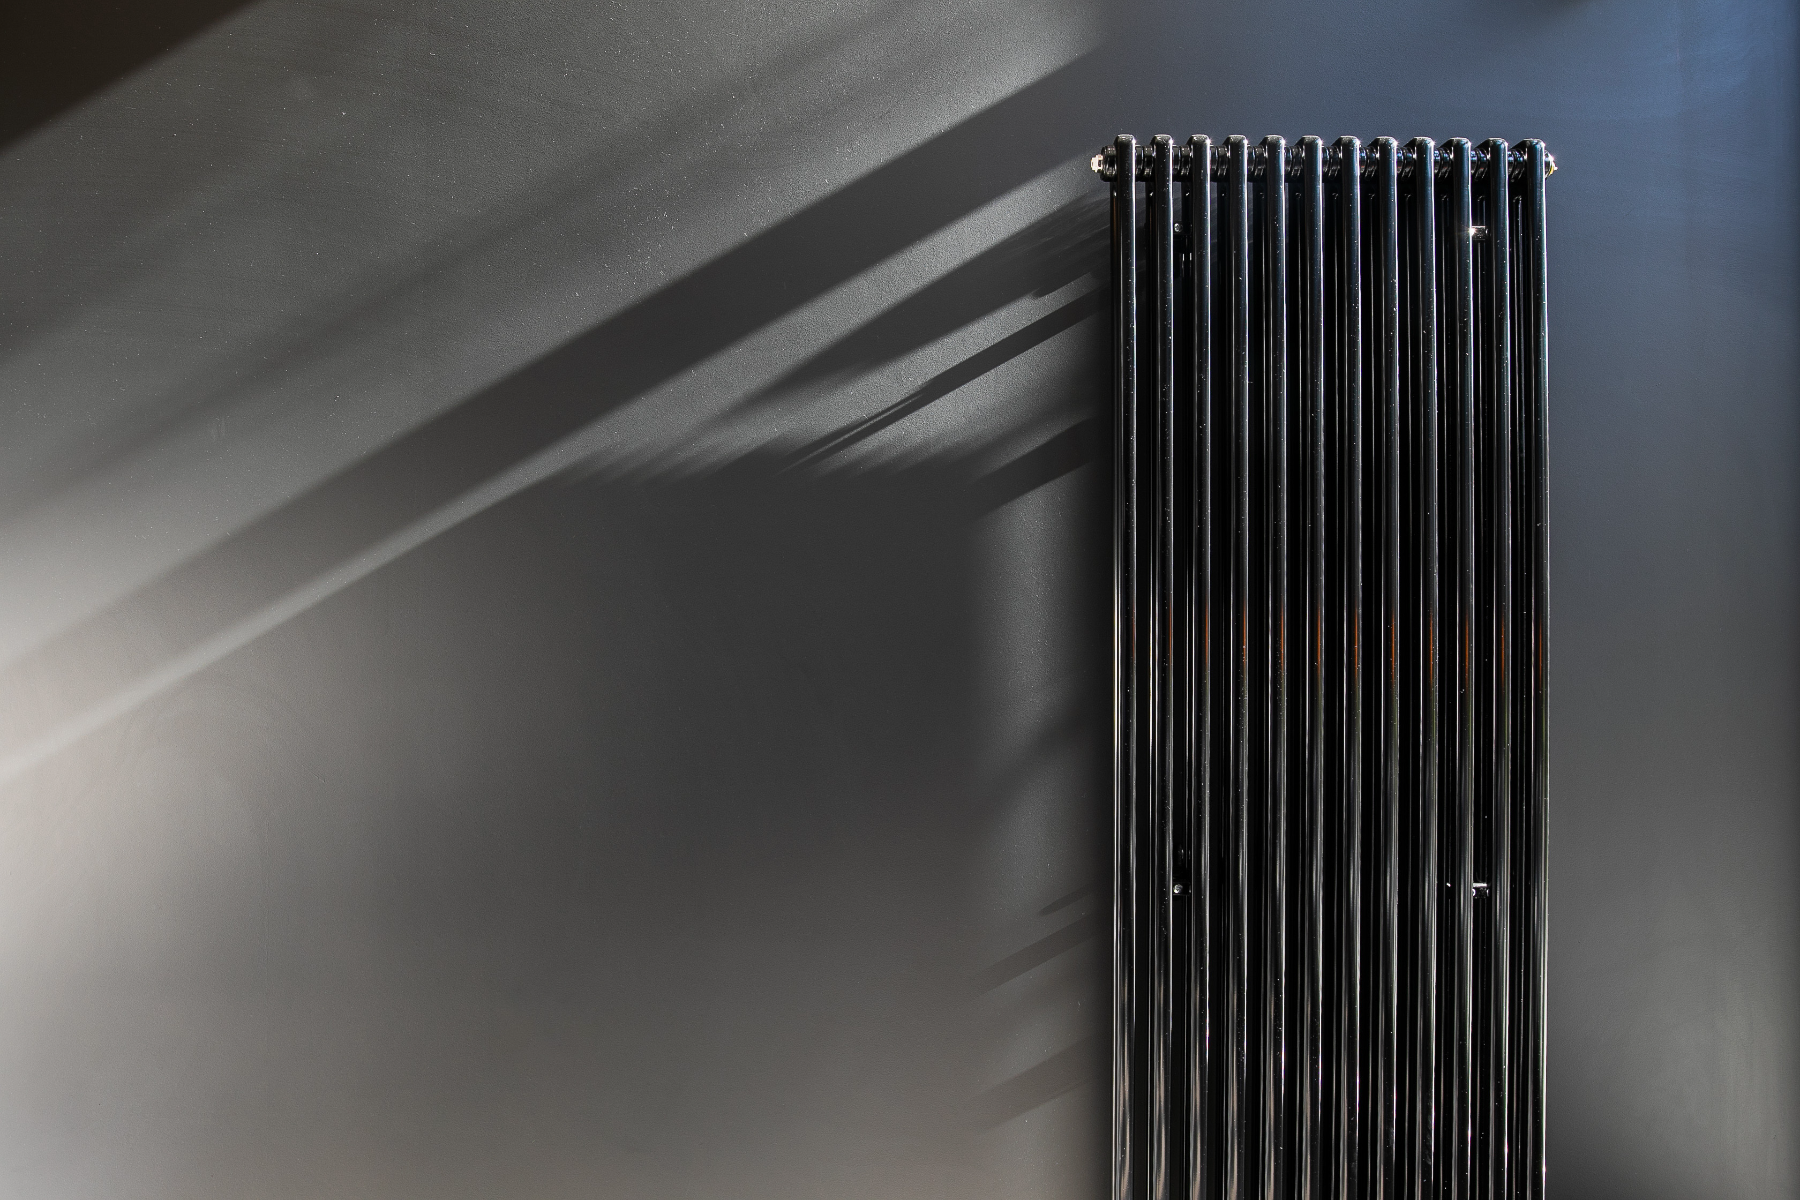  Black Vertical Radiator Mounted Onto A Black Wall With Light Shining In From Window